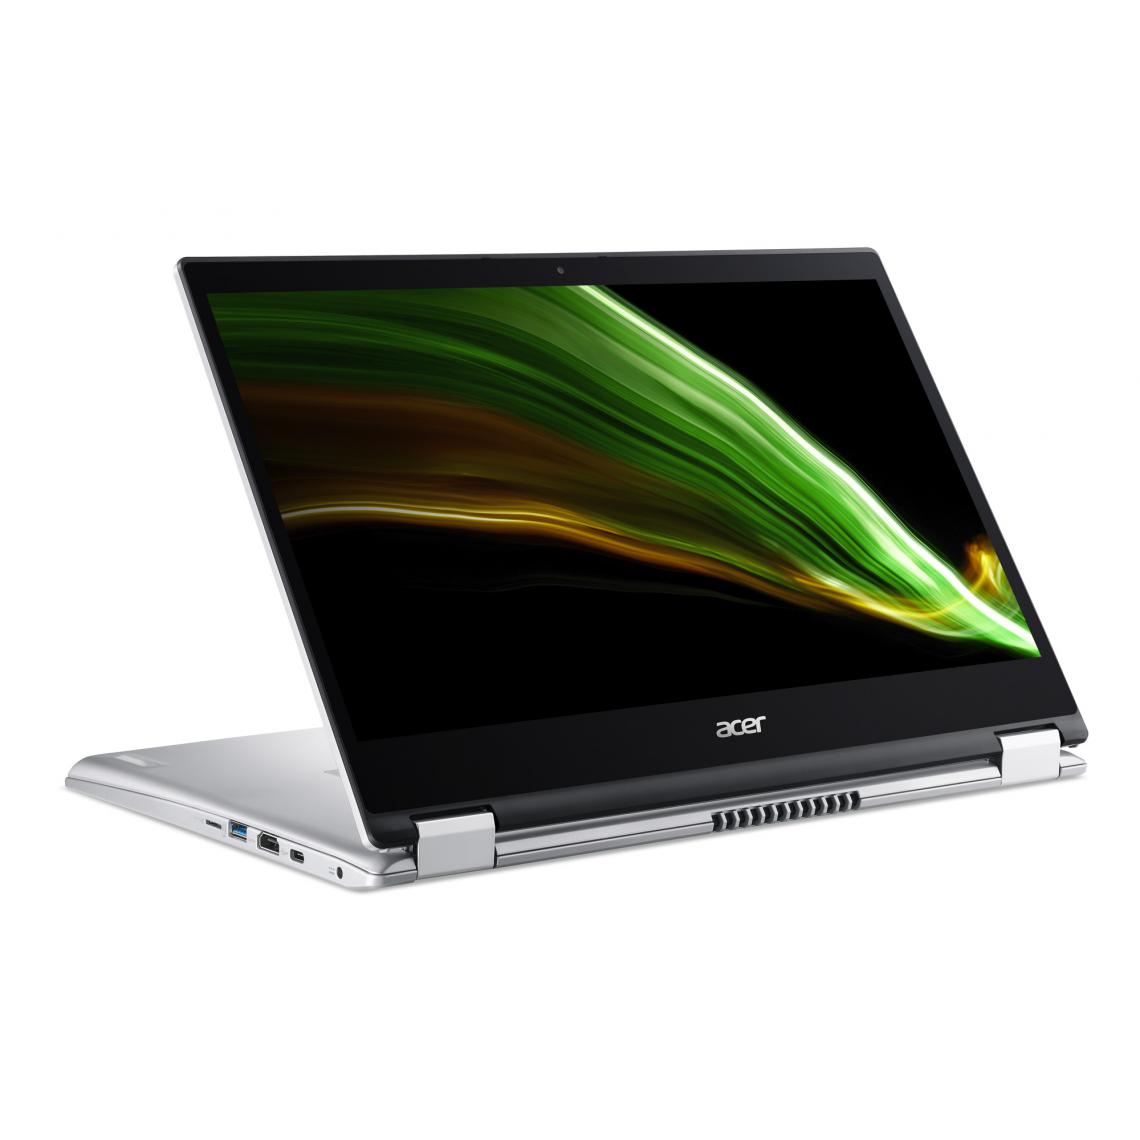 Acer - Spin SP114-31-C02M N4500 14p Spin SP114-31-C02M Intel Celeron N4500 14p FHD Touch 4Go DDR4 eMMC 128Go Intel HD Graphics W10H in S mode 2Y - PC Portable